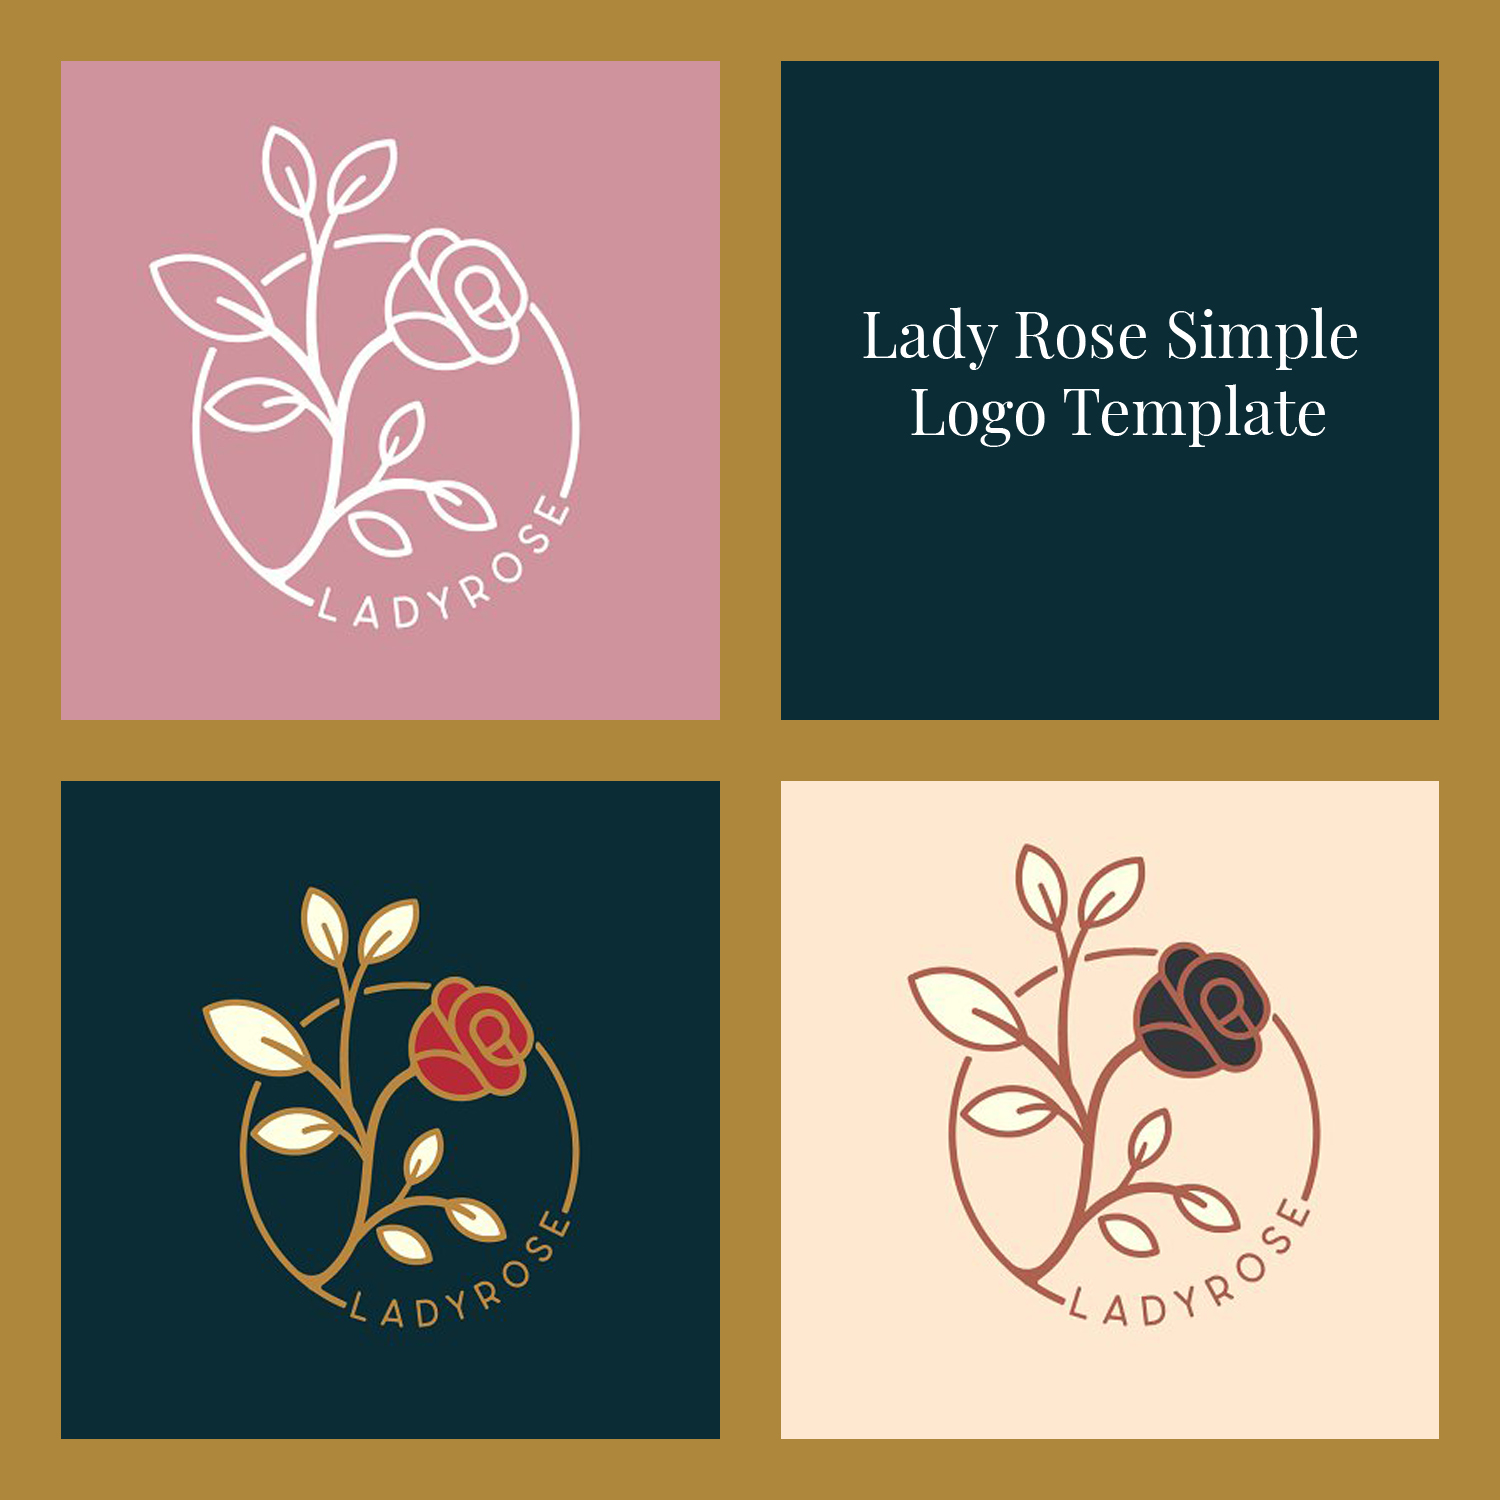 Lady rose simple logo template preview.